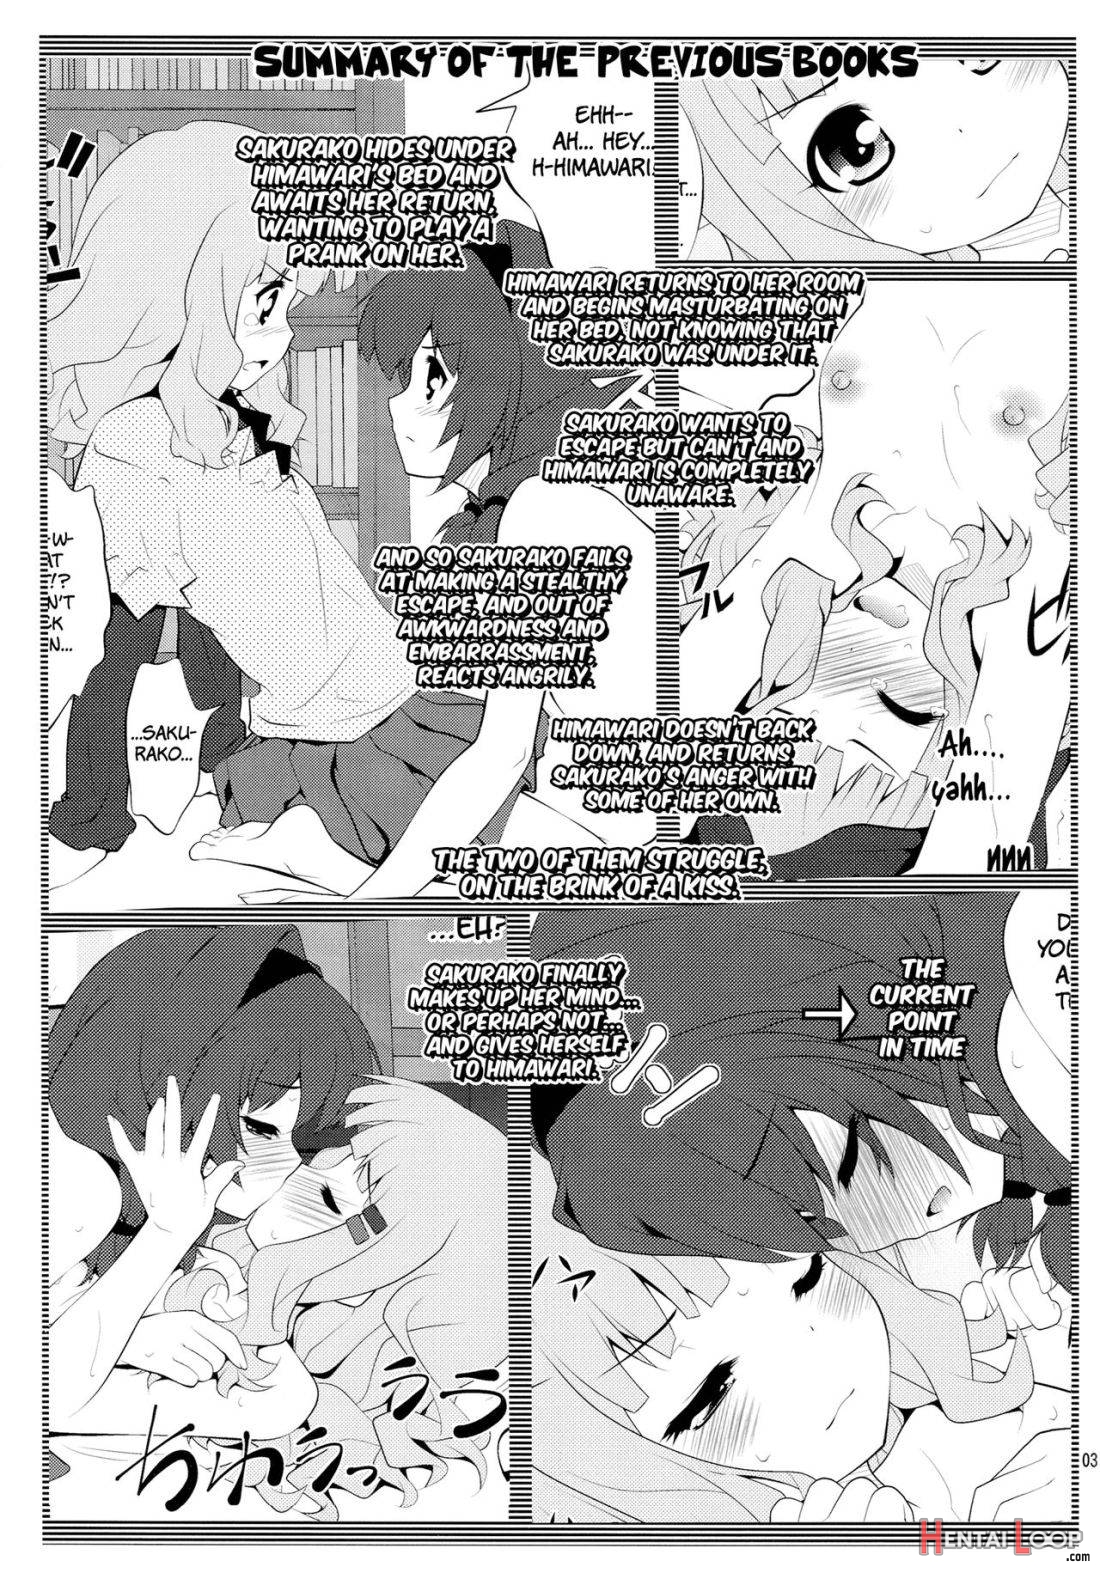 Himegoto Flowers 3 page 2